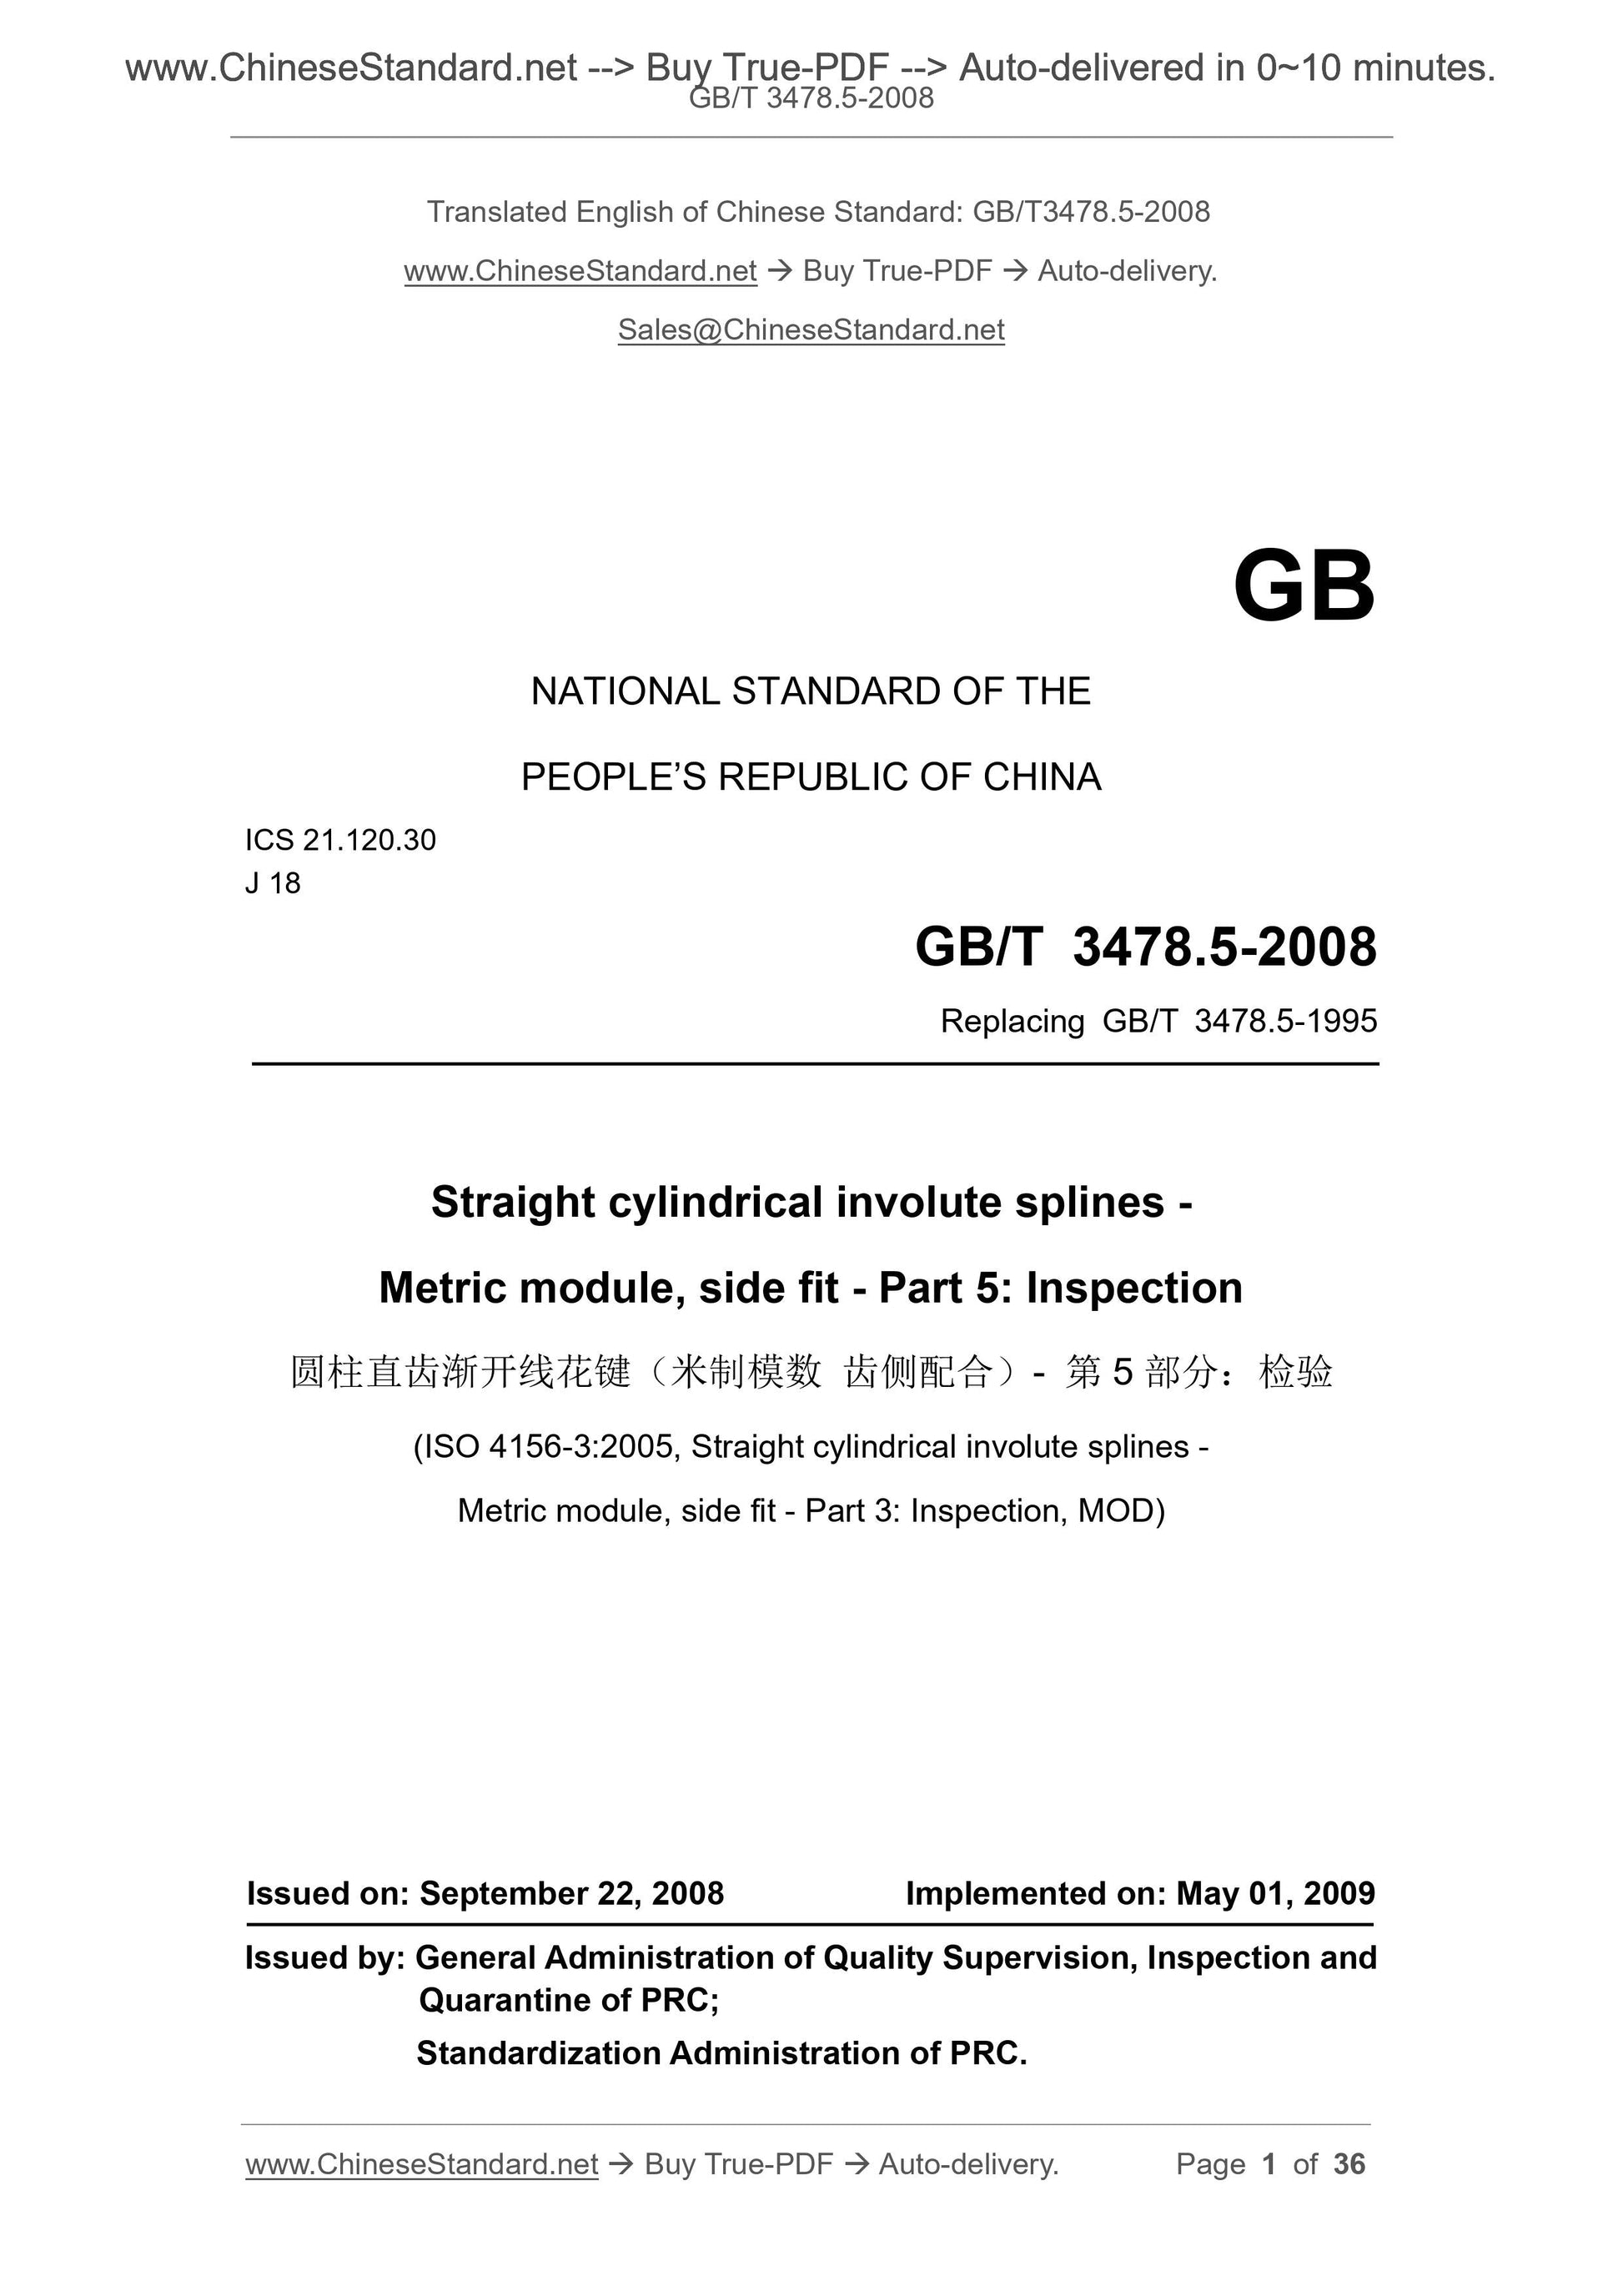 GB/T 3478.5-2008 Page 1